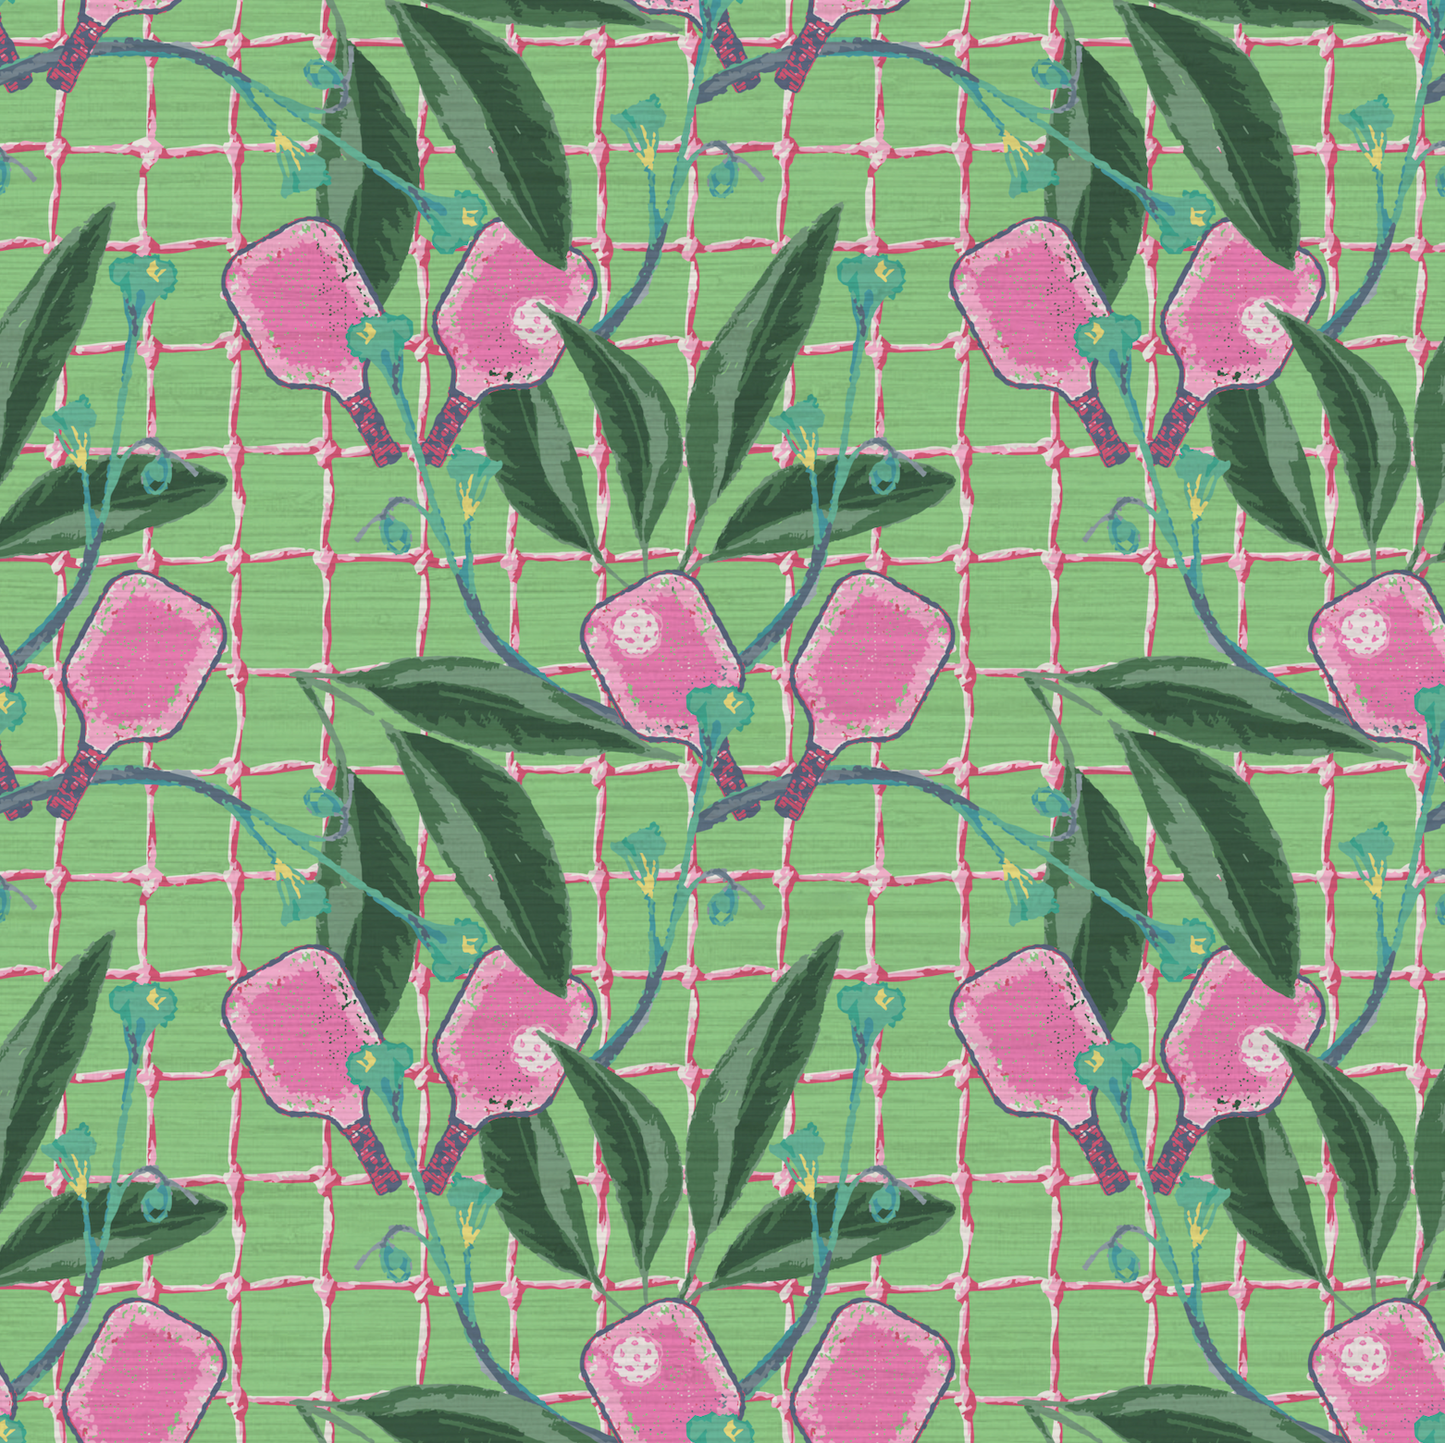 Grasscloth wallpaper Natural Textured Eco-Friendly Non-toxic High-quality  Sustainable Interior Design Bold Custom Tailor-made Retro chic Bold tropical coastal sport pickleball palm leaf kids game gameroom garden botanical Vacation home styling Retreat Relaxed beach vibes pink paddles preppy